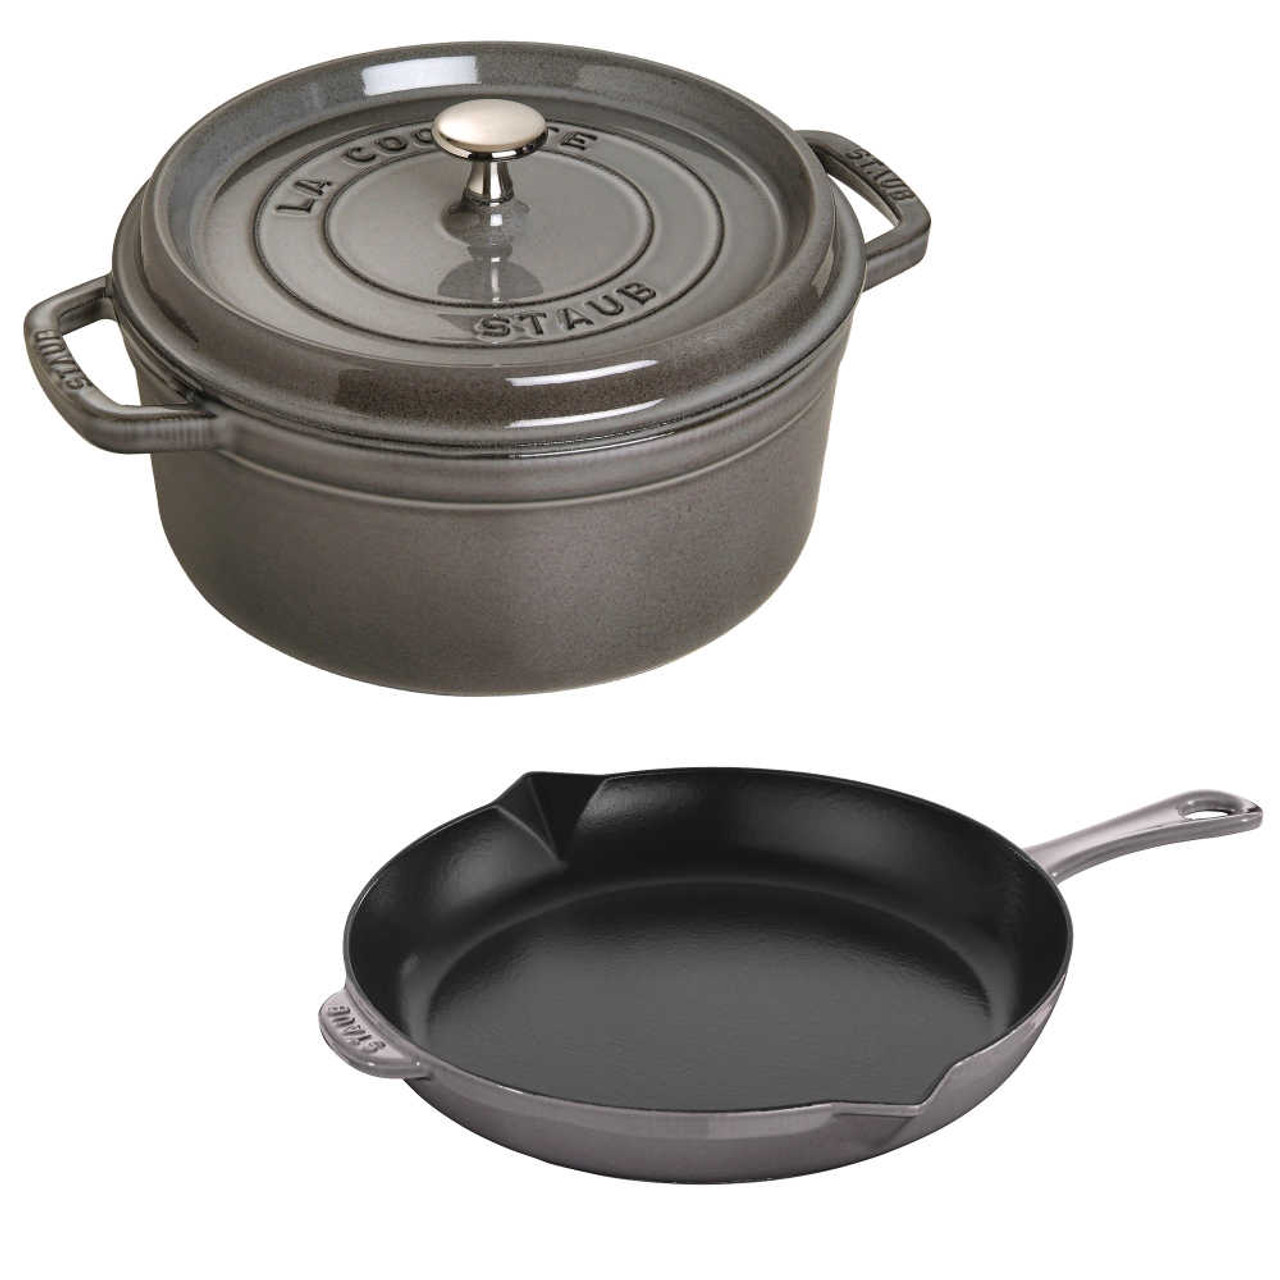 https://cdn11.bigcommerce.com/s-hccytny0od/images/stencil/1280x1280/products/5785/25655/Staub_Cast_Iron_Cocotte_and_Fry_Pan_Set_Graphite_Grey__46598.1696526595.jpg?c=2?imbypass=on